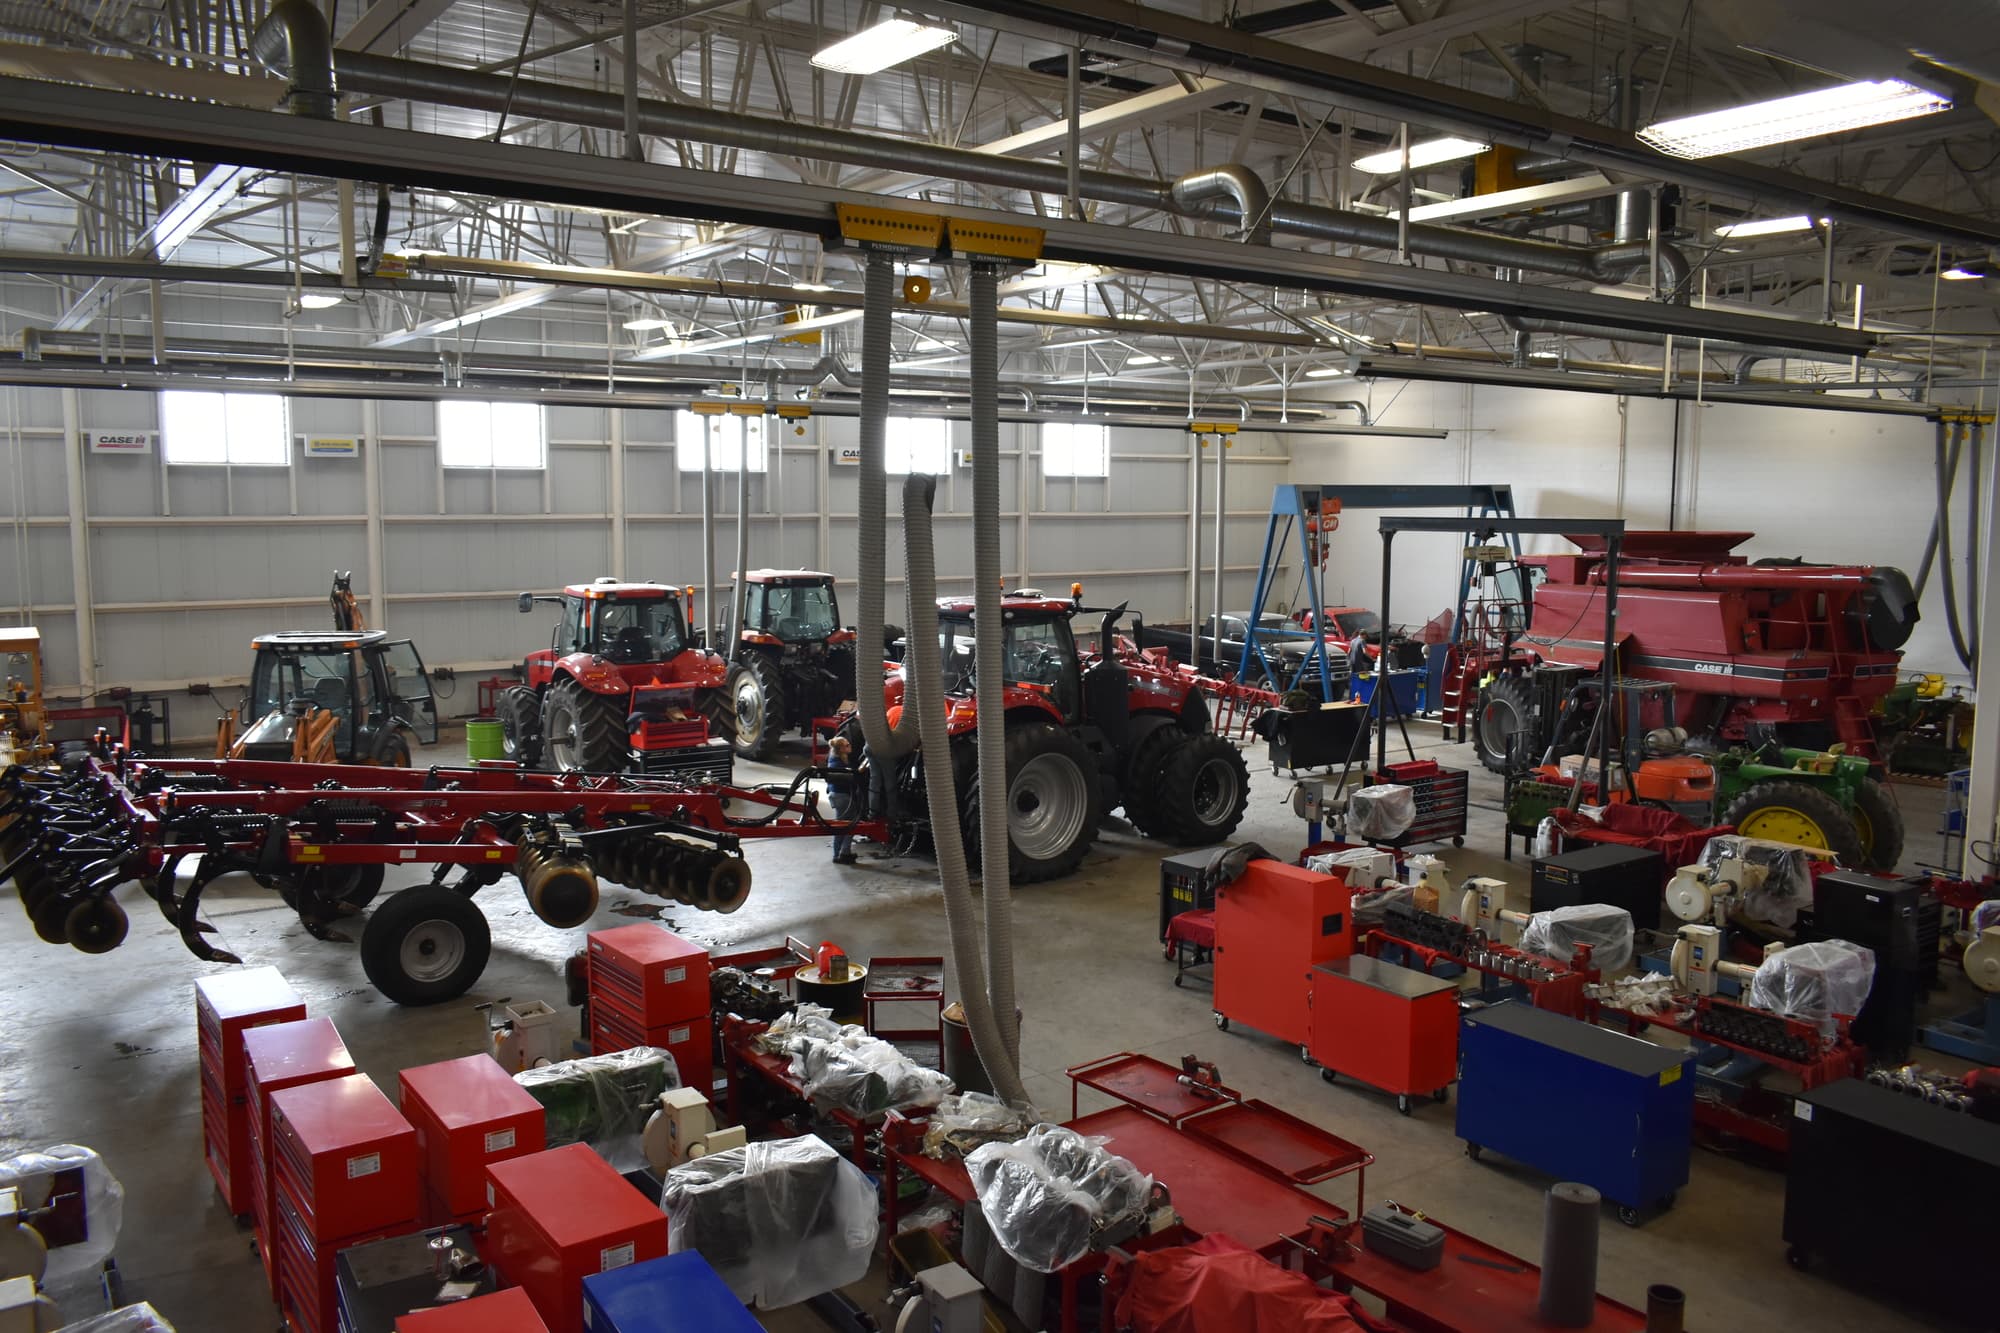 large room filled with tractors and farm equipment